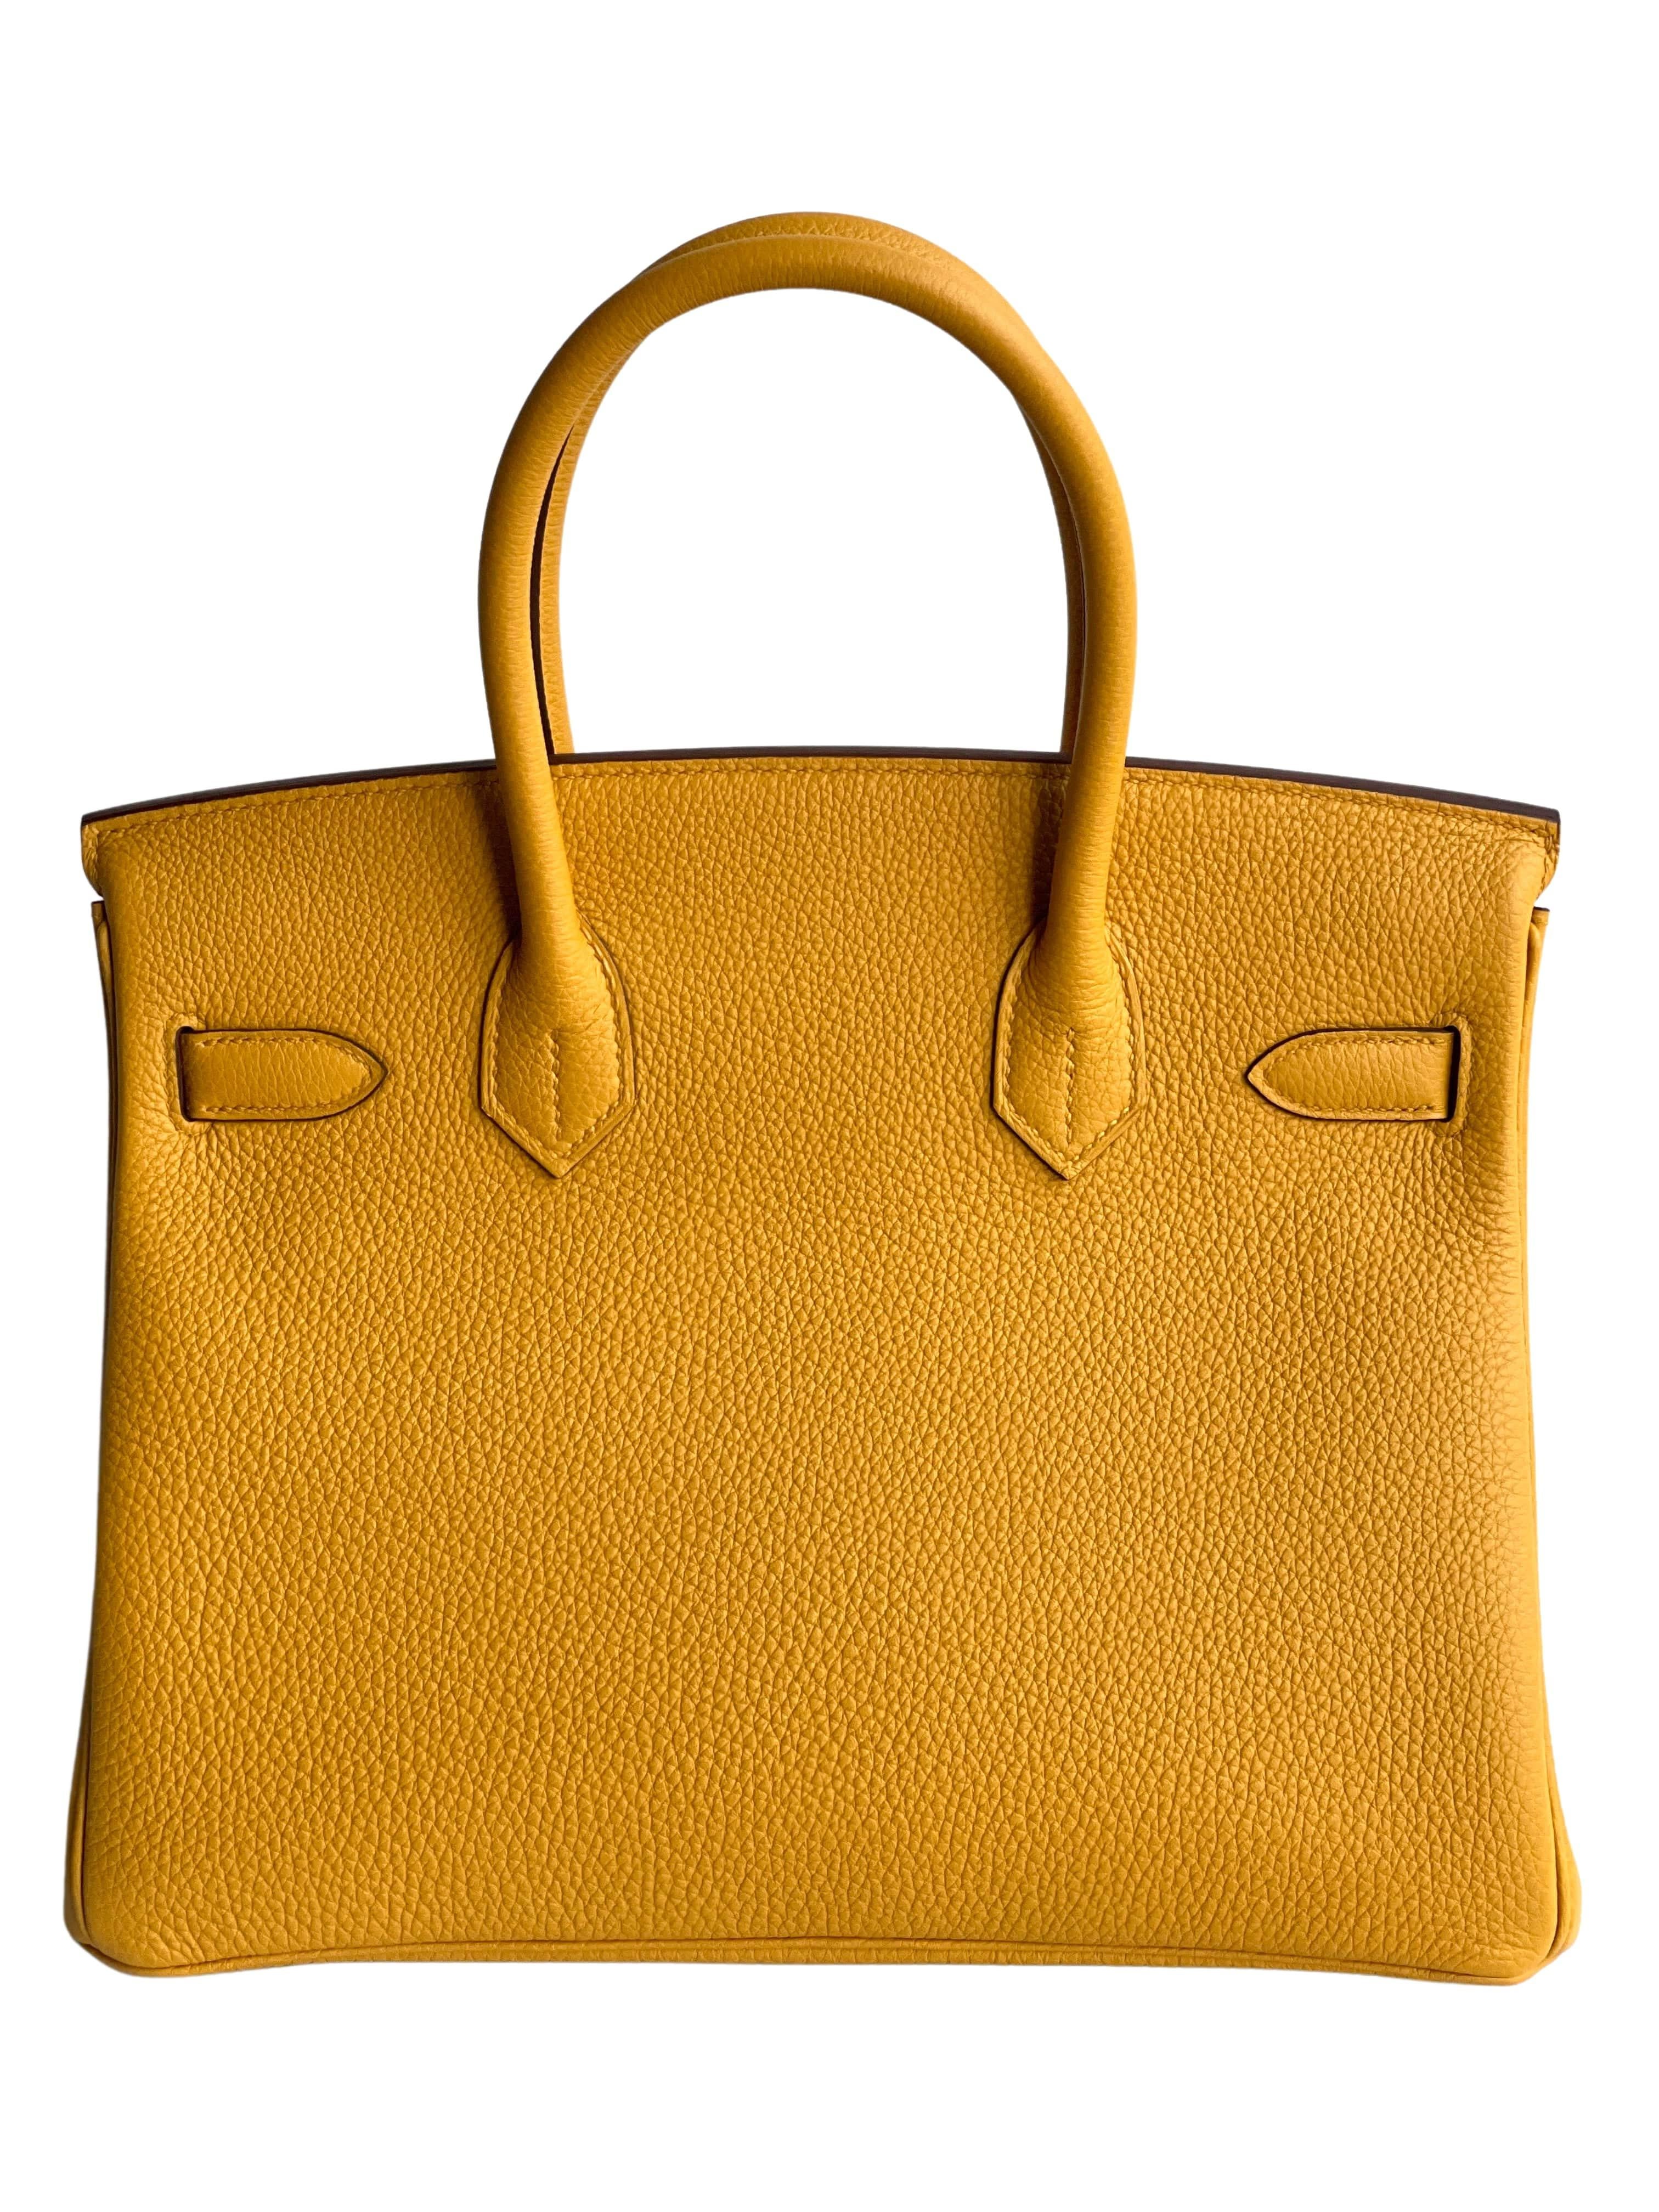  Birkin 30
Specially ordered for a VIP client
One of the prettiest colors around!
Jaune Ambre
Vip order with Horseshoe Stamp
Why carry an ordinary Birkin when you can have a VIP Special order , stamped with Horseshoe indicating it was specially